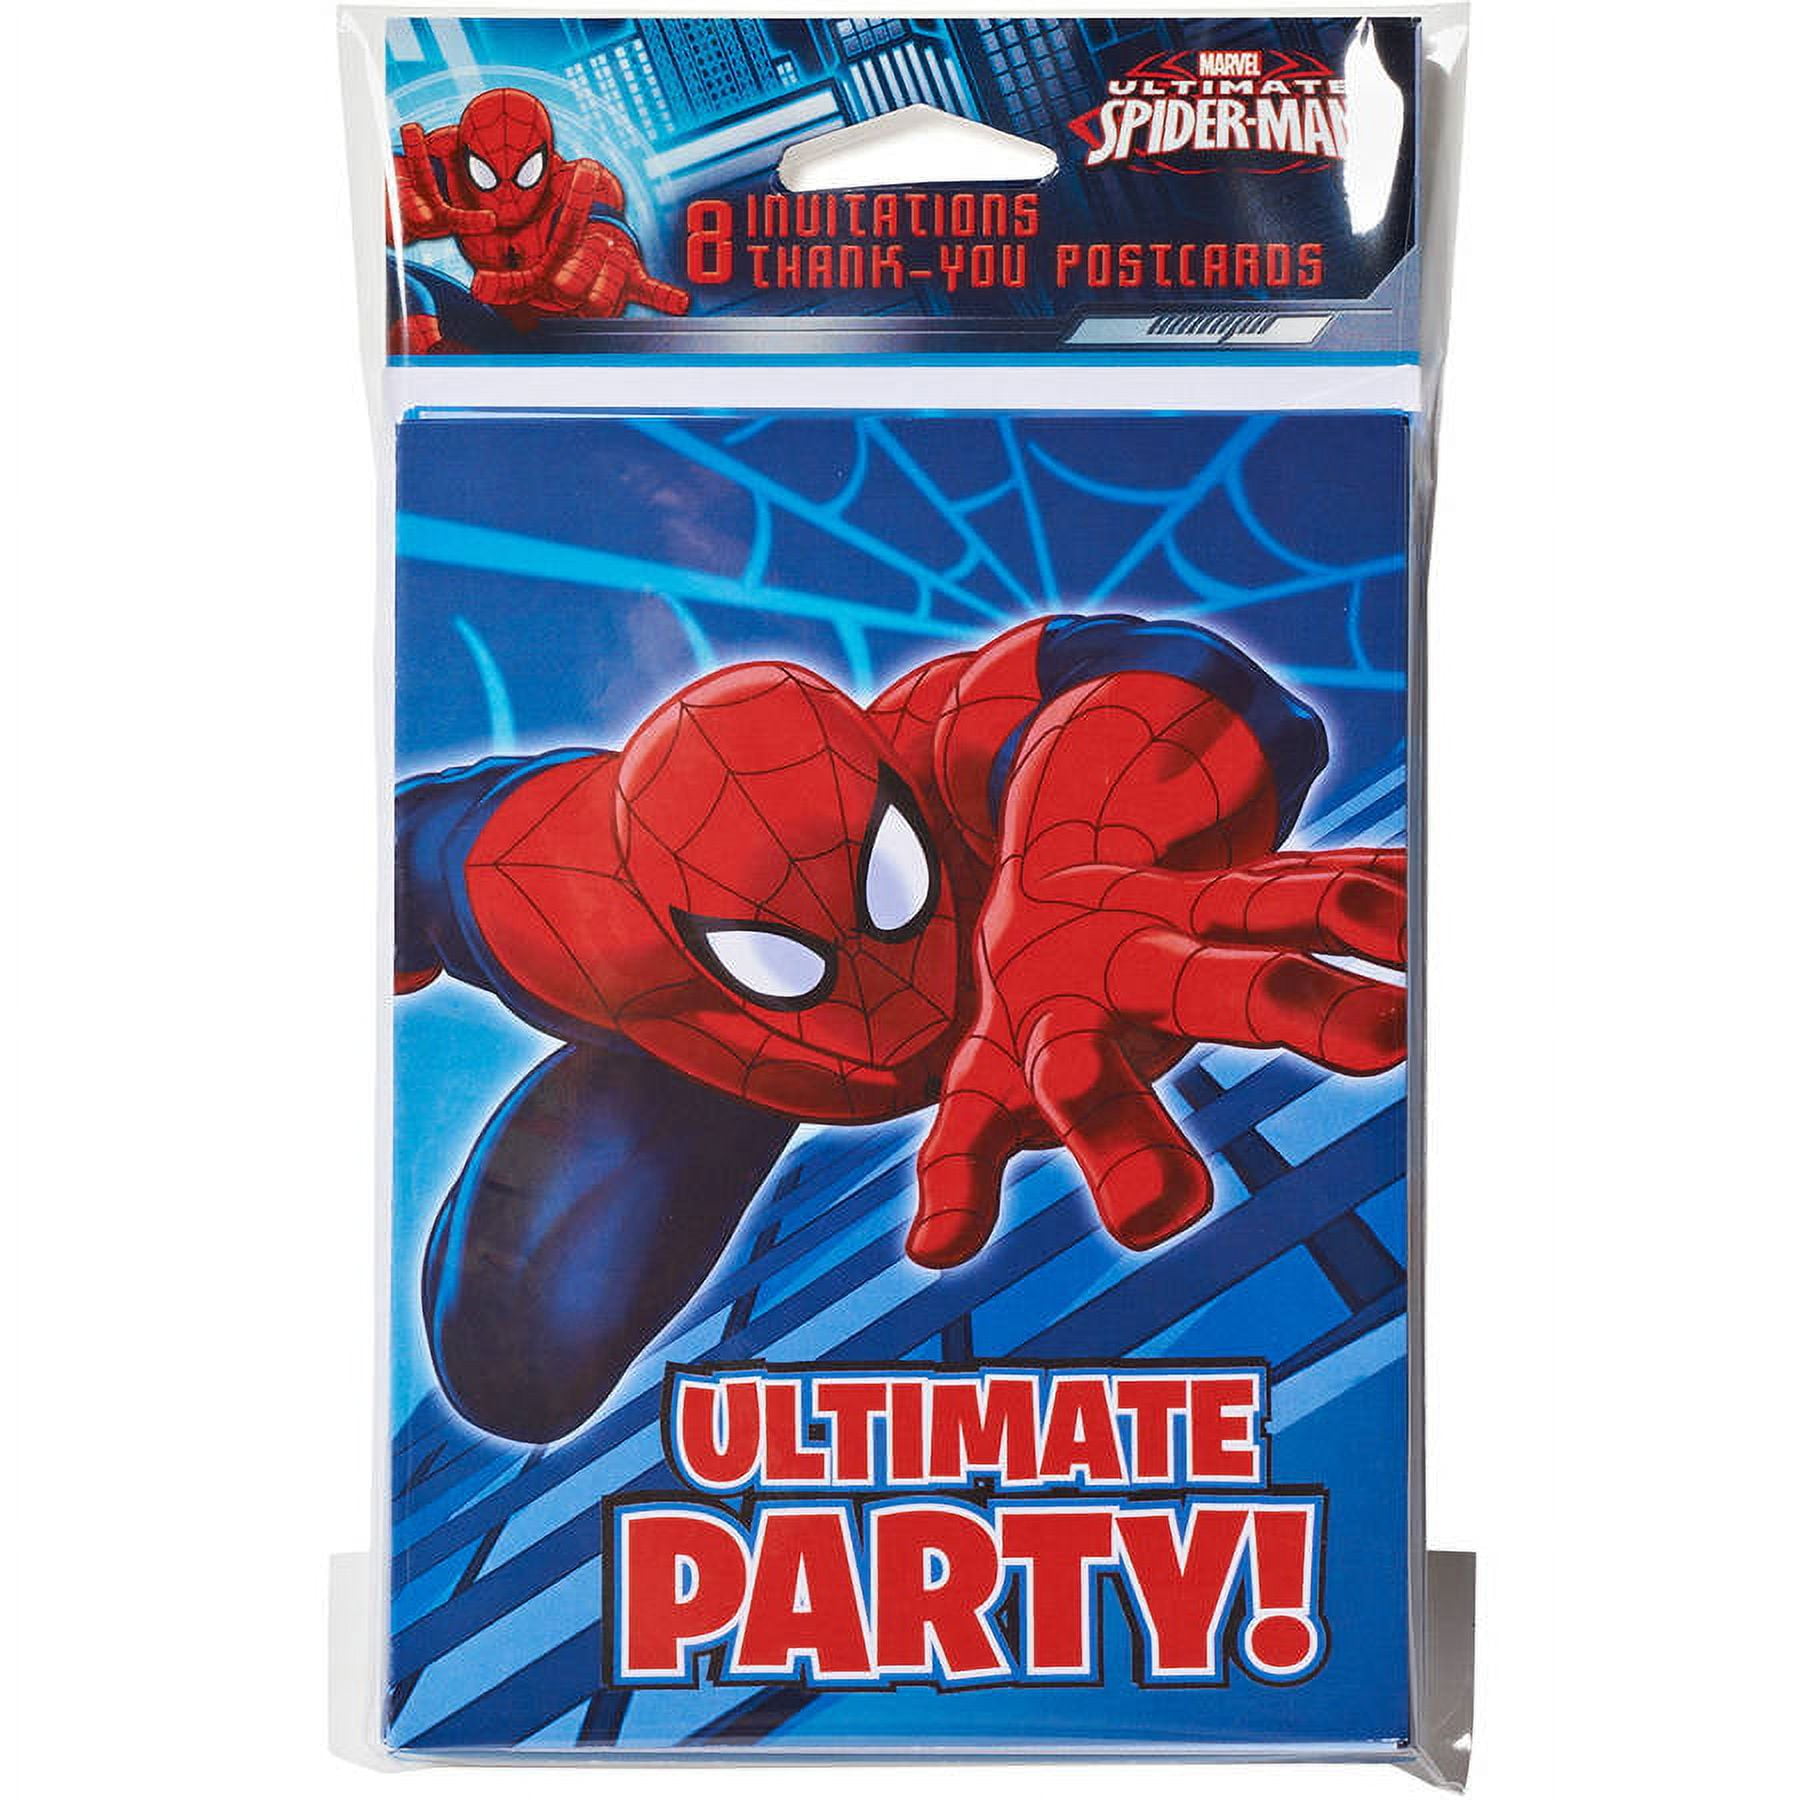 Spider-Man Postcard Thank You Notes With Blue Envelopes - 8 Count (481355)